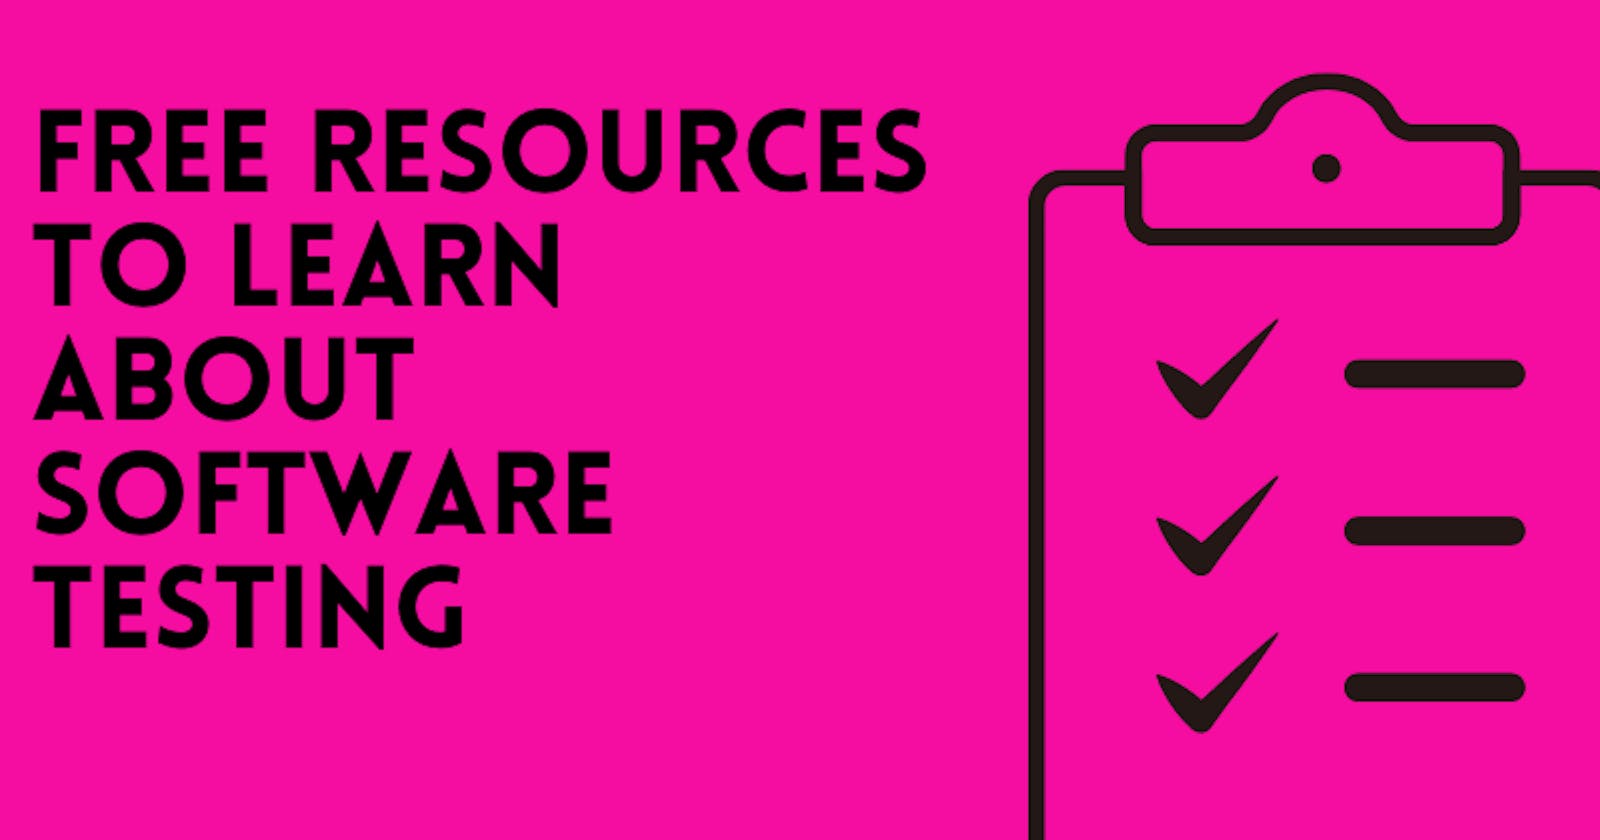 Free Resources to Learn About Software Testing